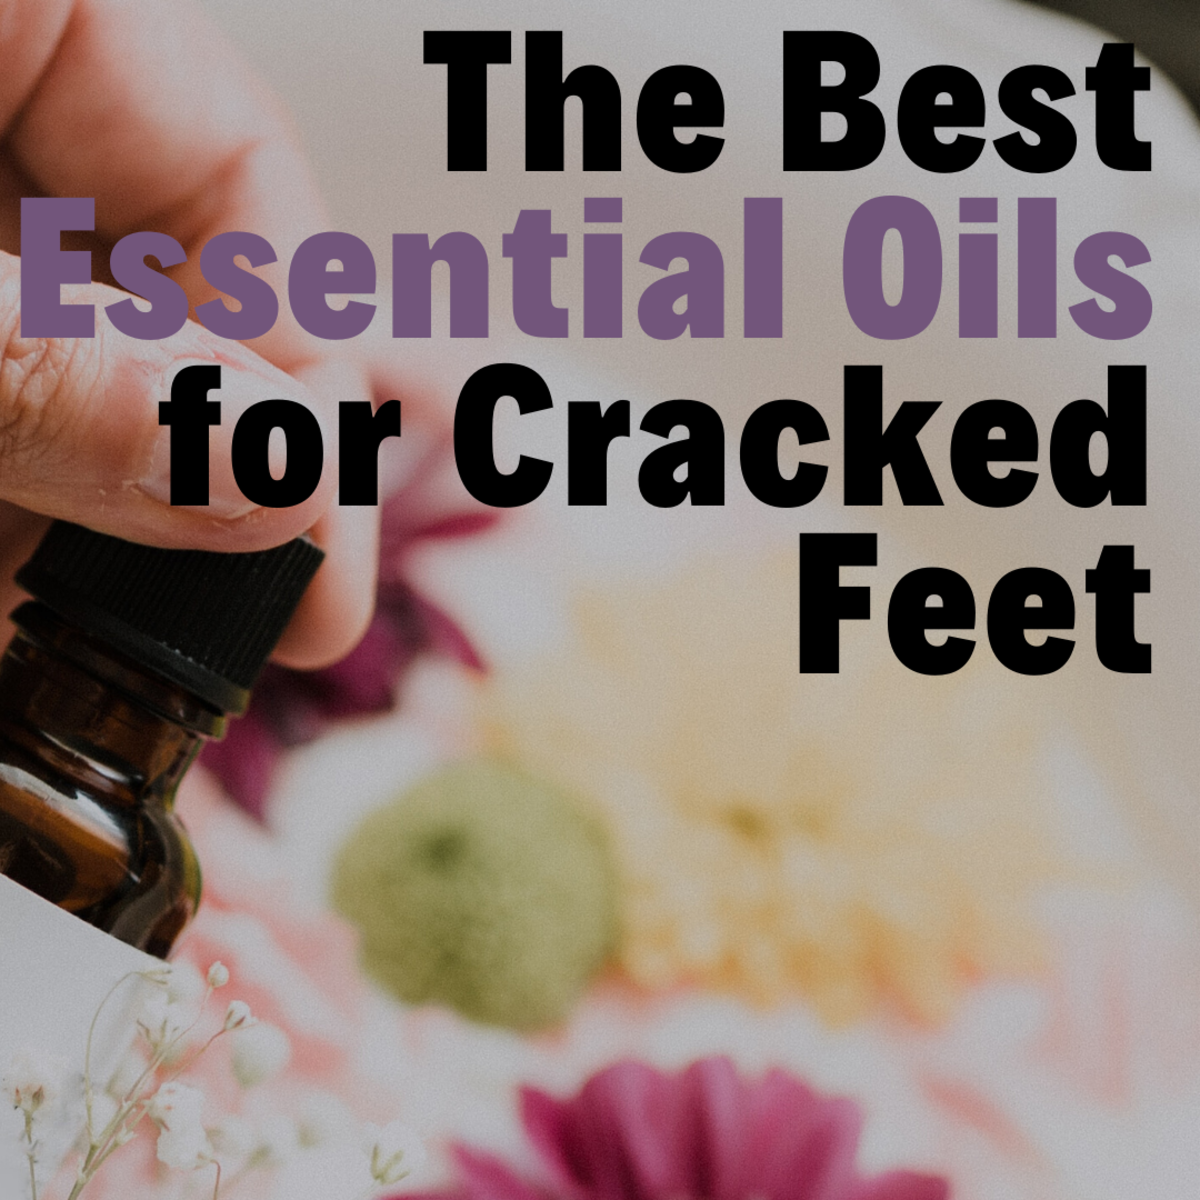 How to Heal Cracked Feet and Dry Heels With Essential Oils